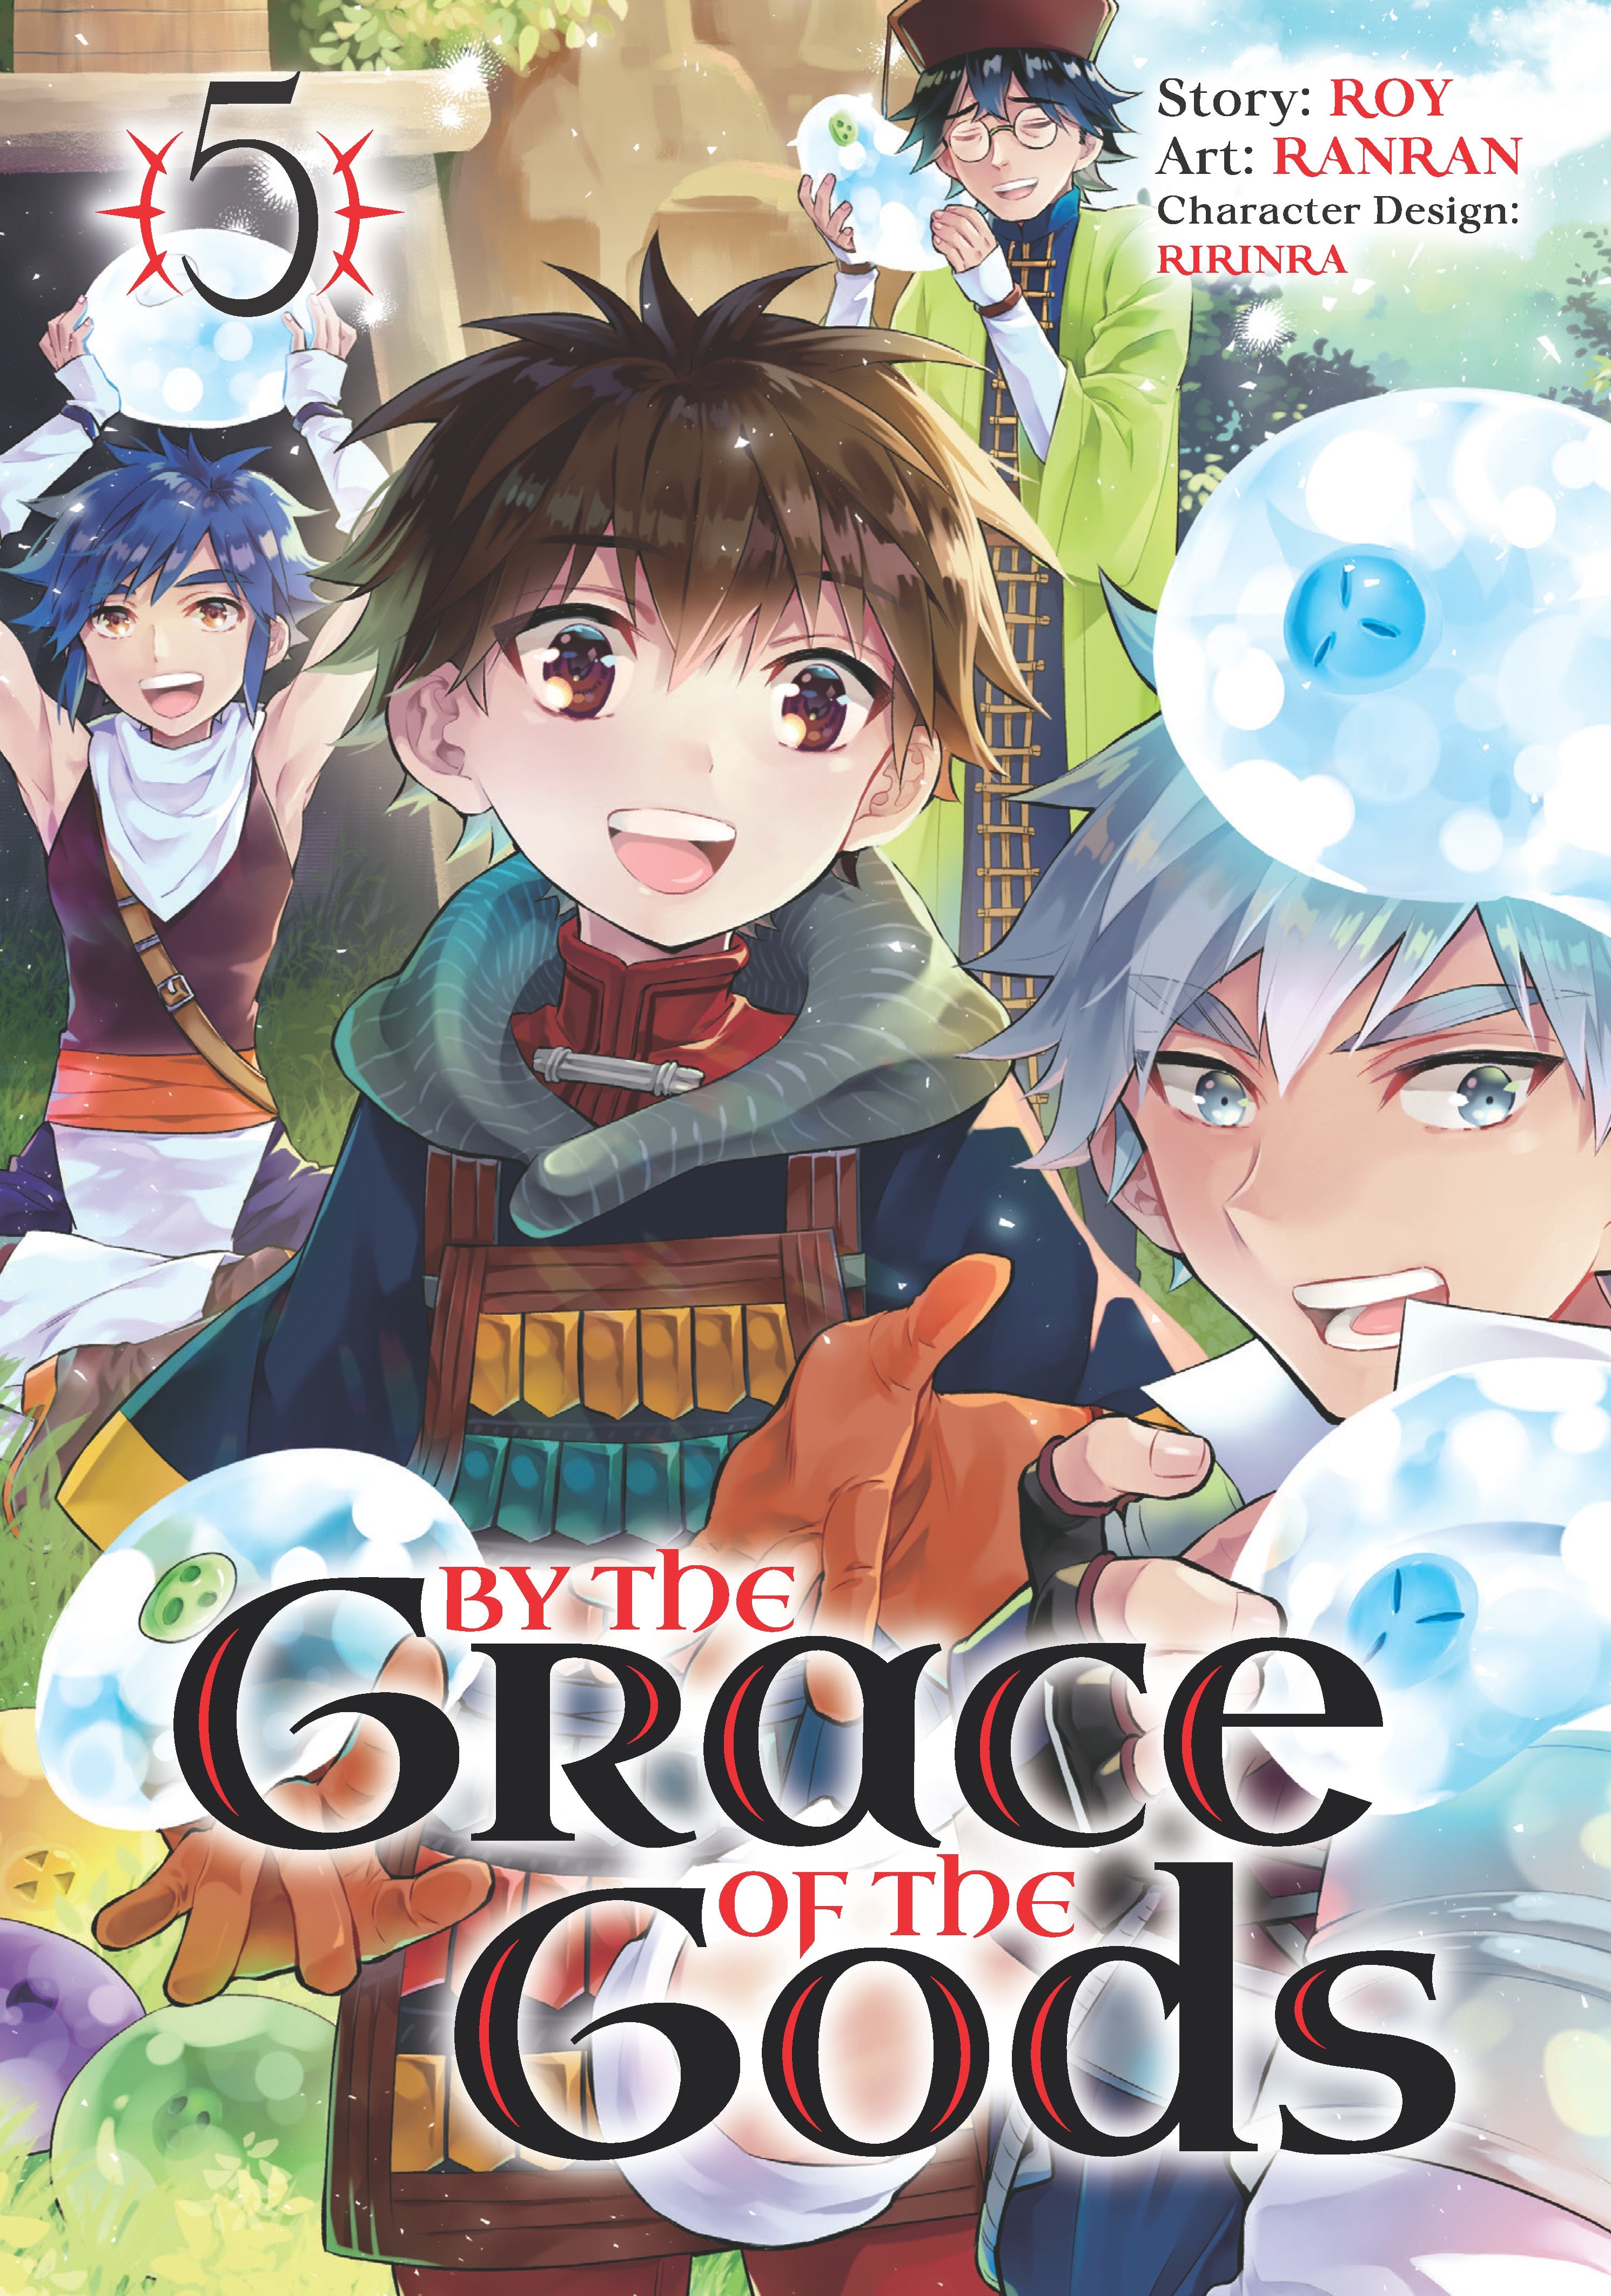 By the Grace of the Gods (Manga), Vol. 5